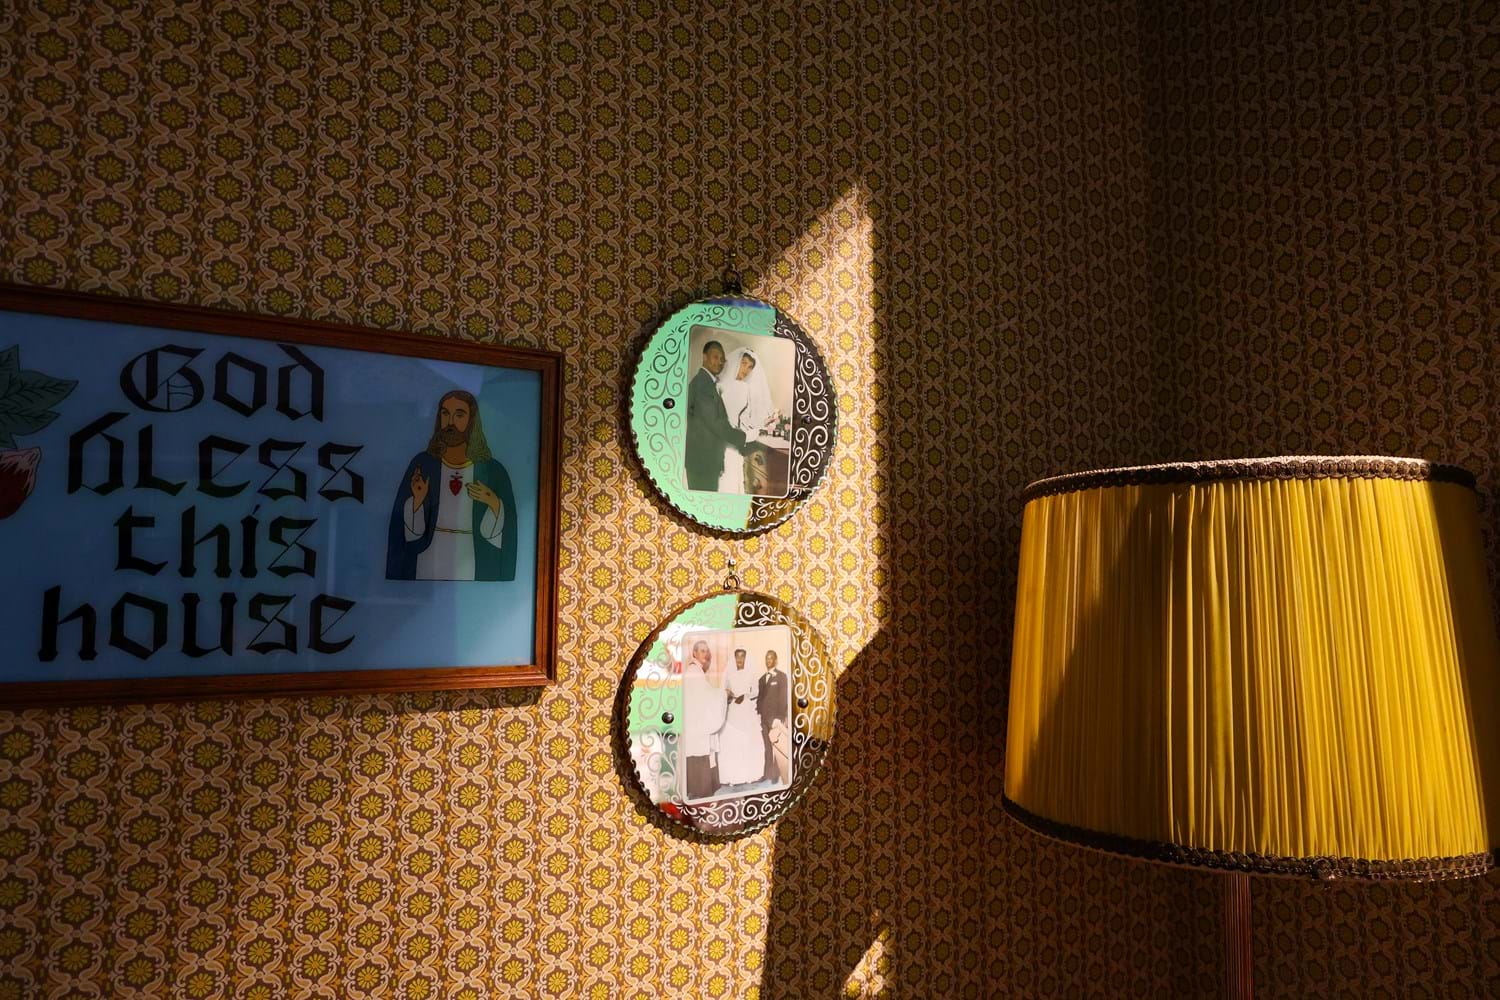 Two photos hanging on a wall dressed with seventies patterned wallpaper, a yellow lamp shade is on the right and a framed sign with the words "God bless this house" is on the left.